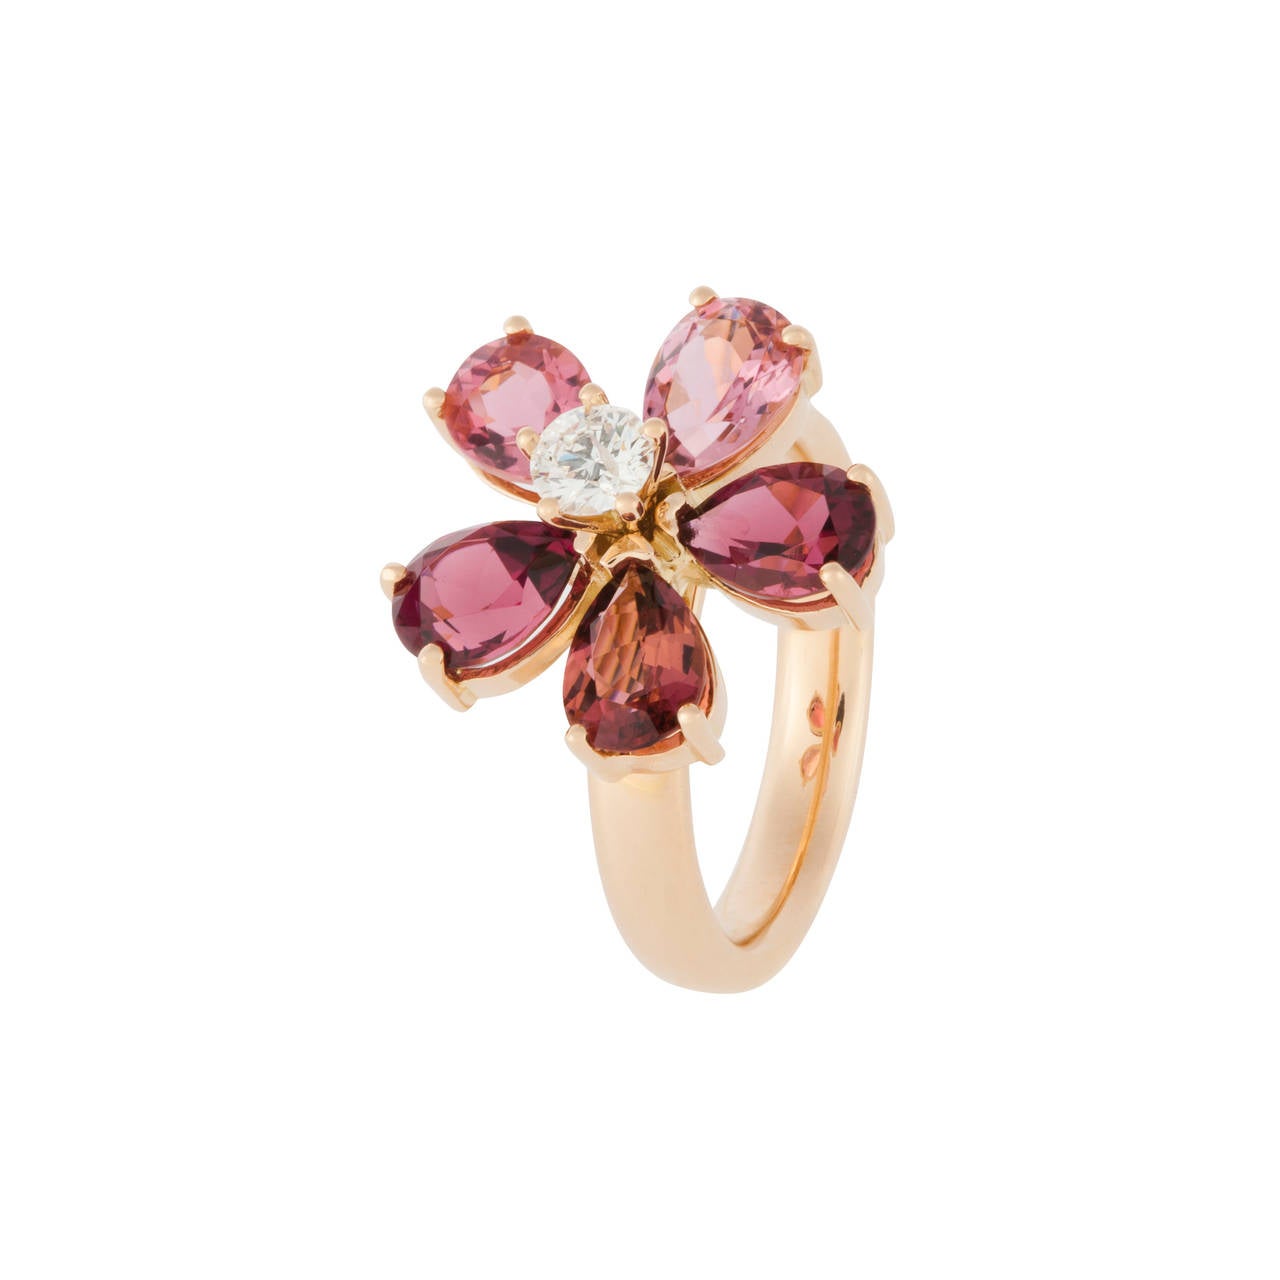 Colourful ring in floral design by RENESIM of Munich
Ring in 18-carat rose gold set with 5 petals of faceted redish/pink tourmalines. Each approx. 7 x 5 mm. The centre is built by a brilliant-cut diamond of 0.25 ct.